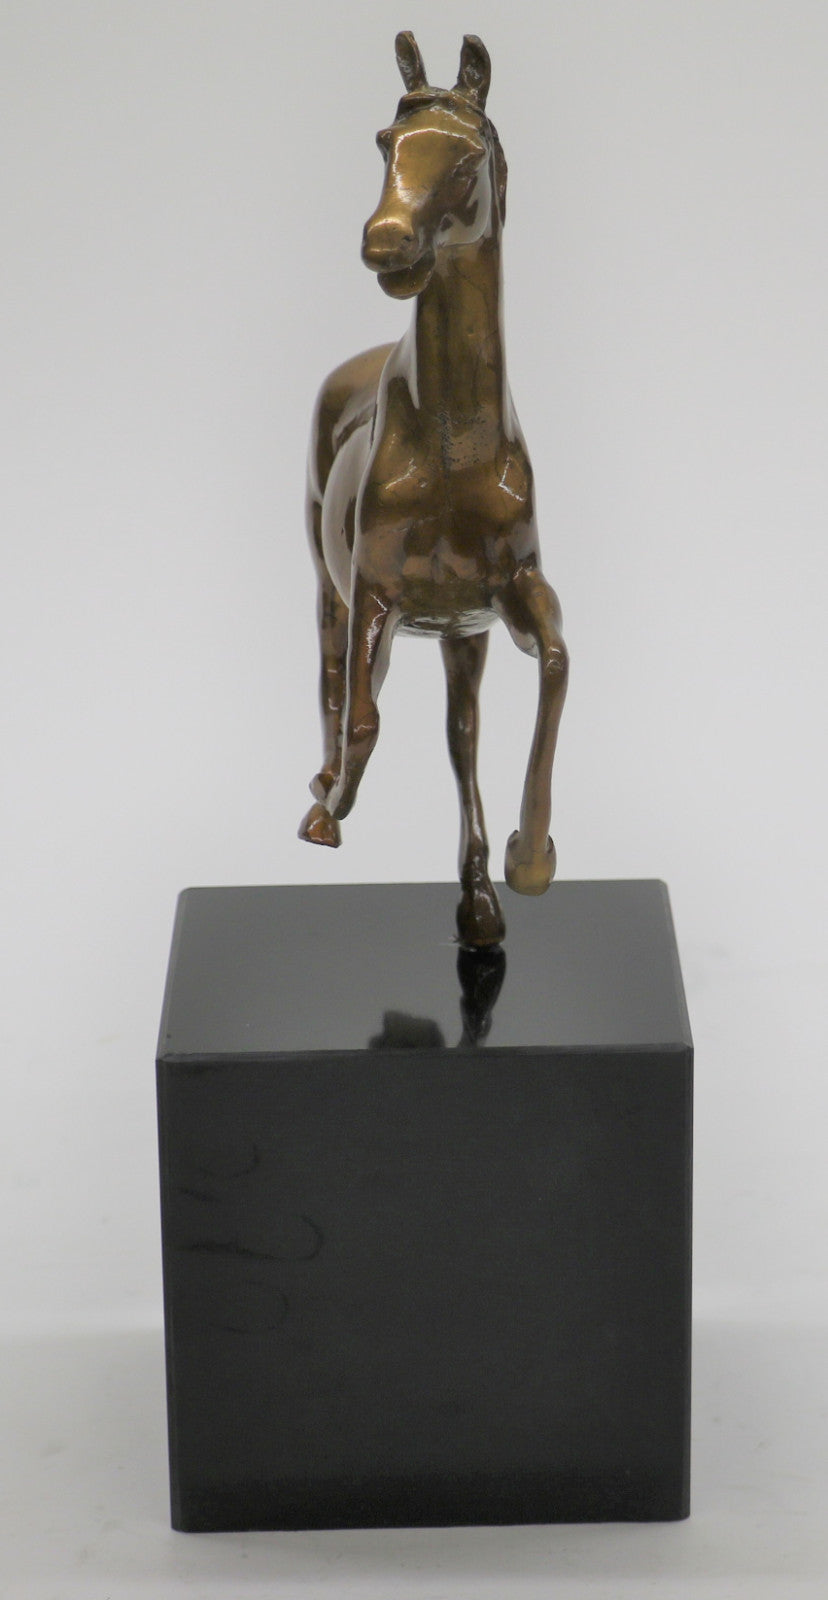 Signed Milo Running Horse Bronze Sculpture Limited Edition Statue Figurine Gift